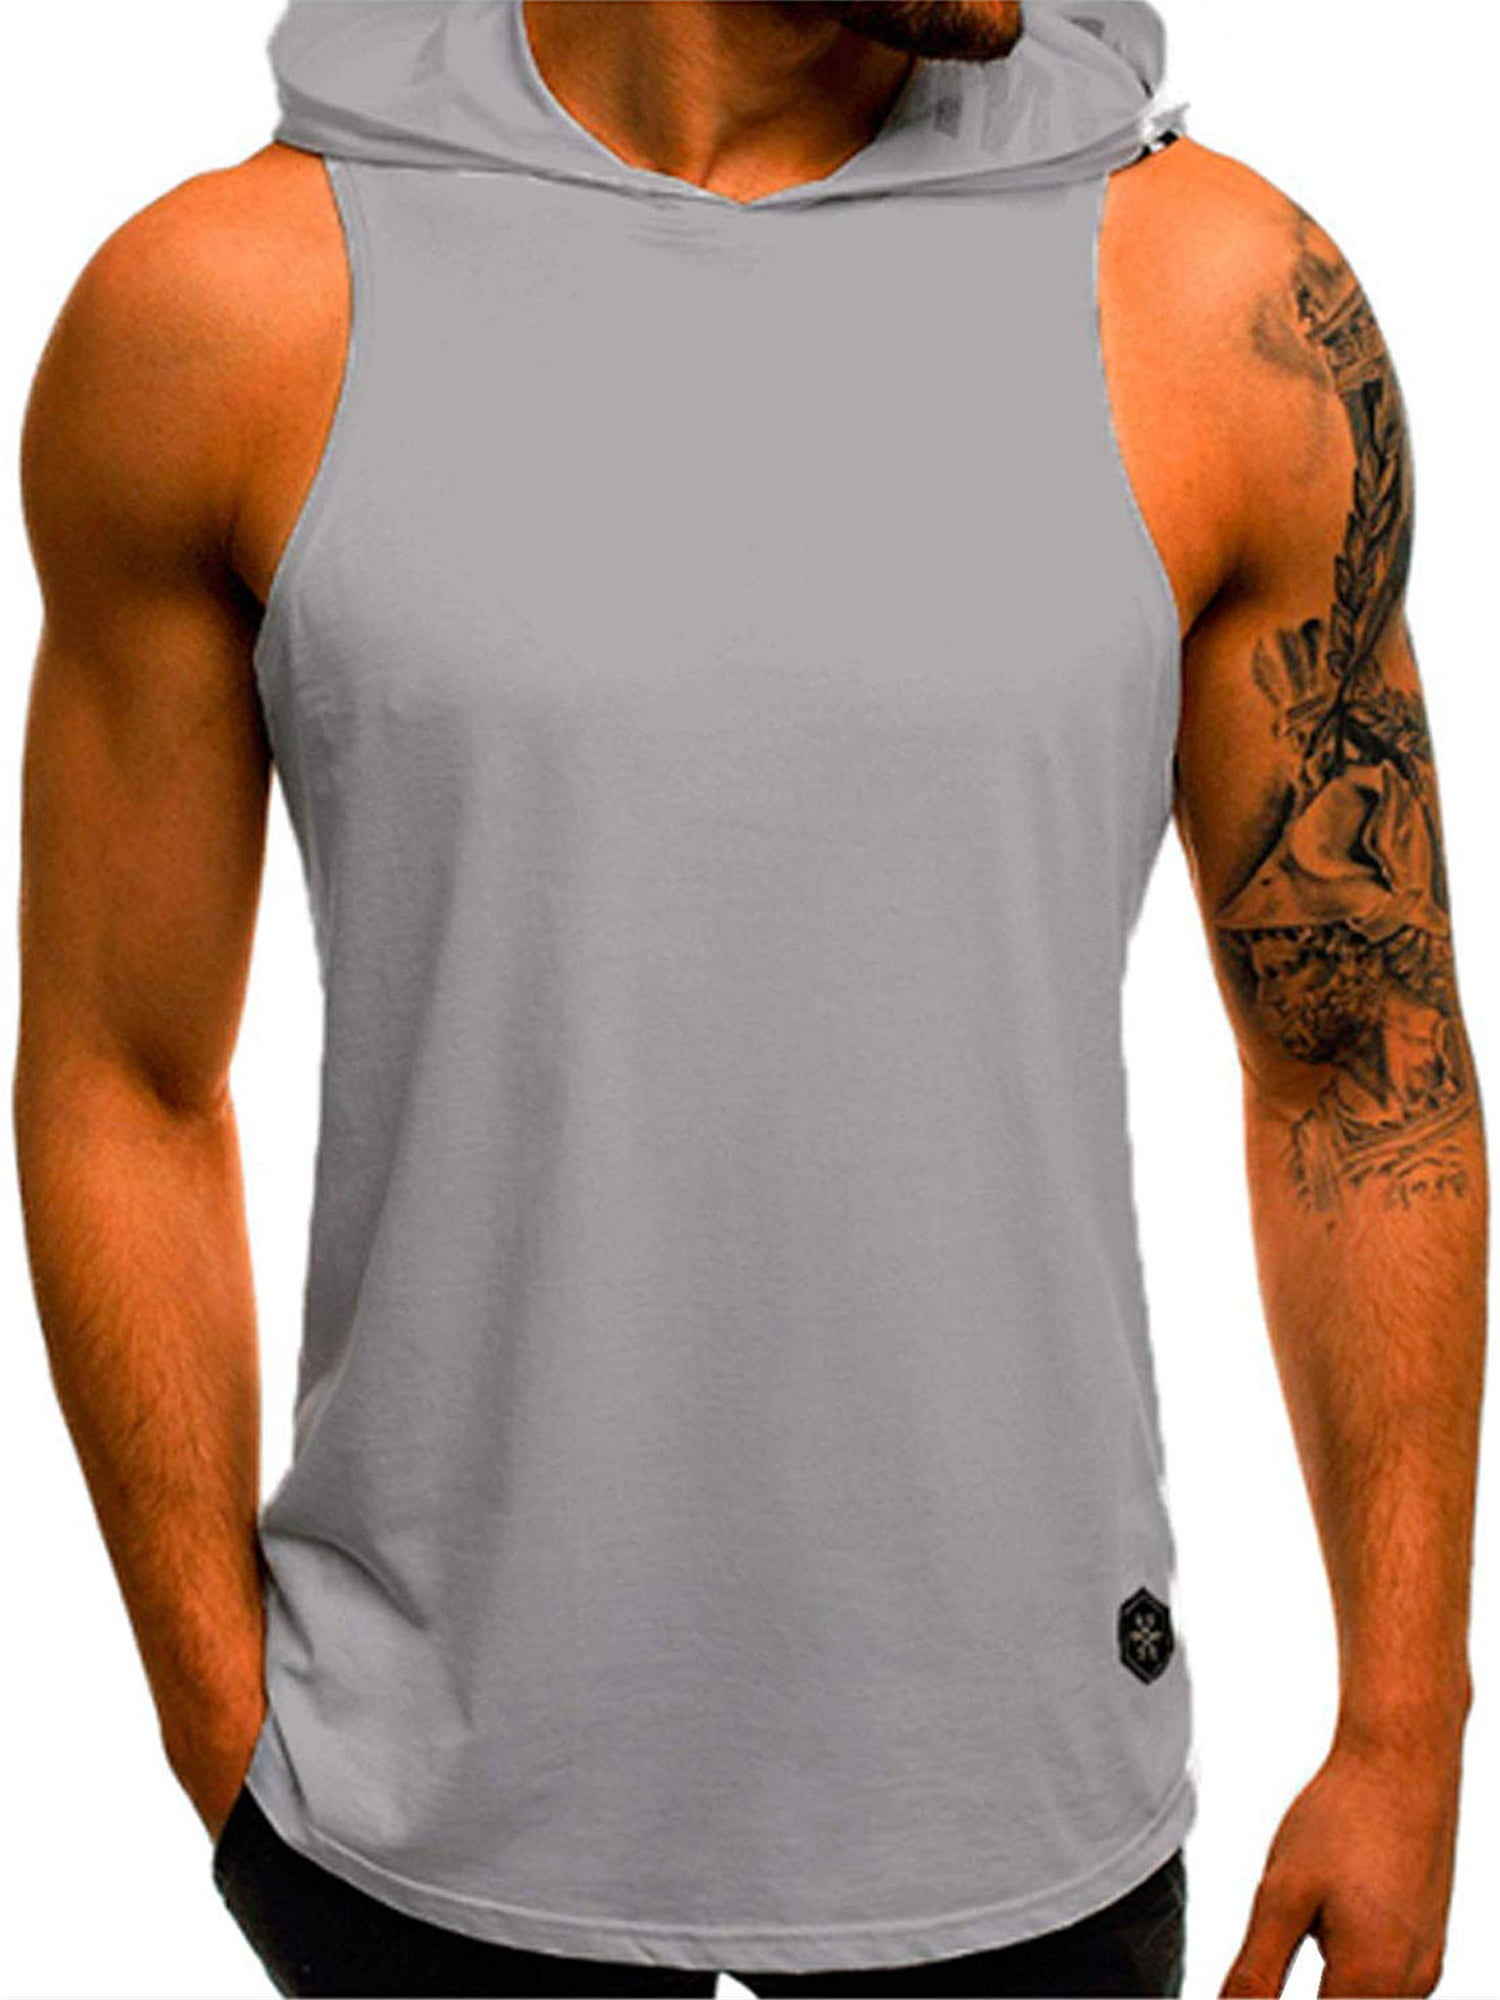 FAPIZI Mens Workout Hooded Tank Tops Camouflage Bodybuilding Muscle Cut Off T Shirt Sleeveless Gym Hoodies Vest 